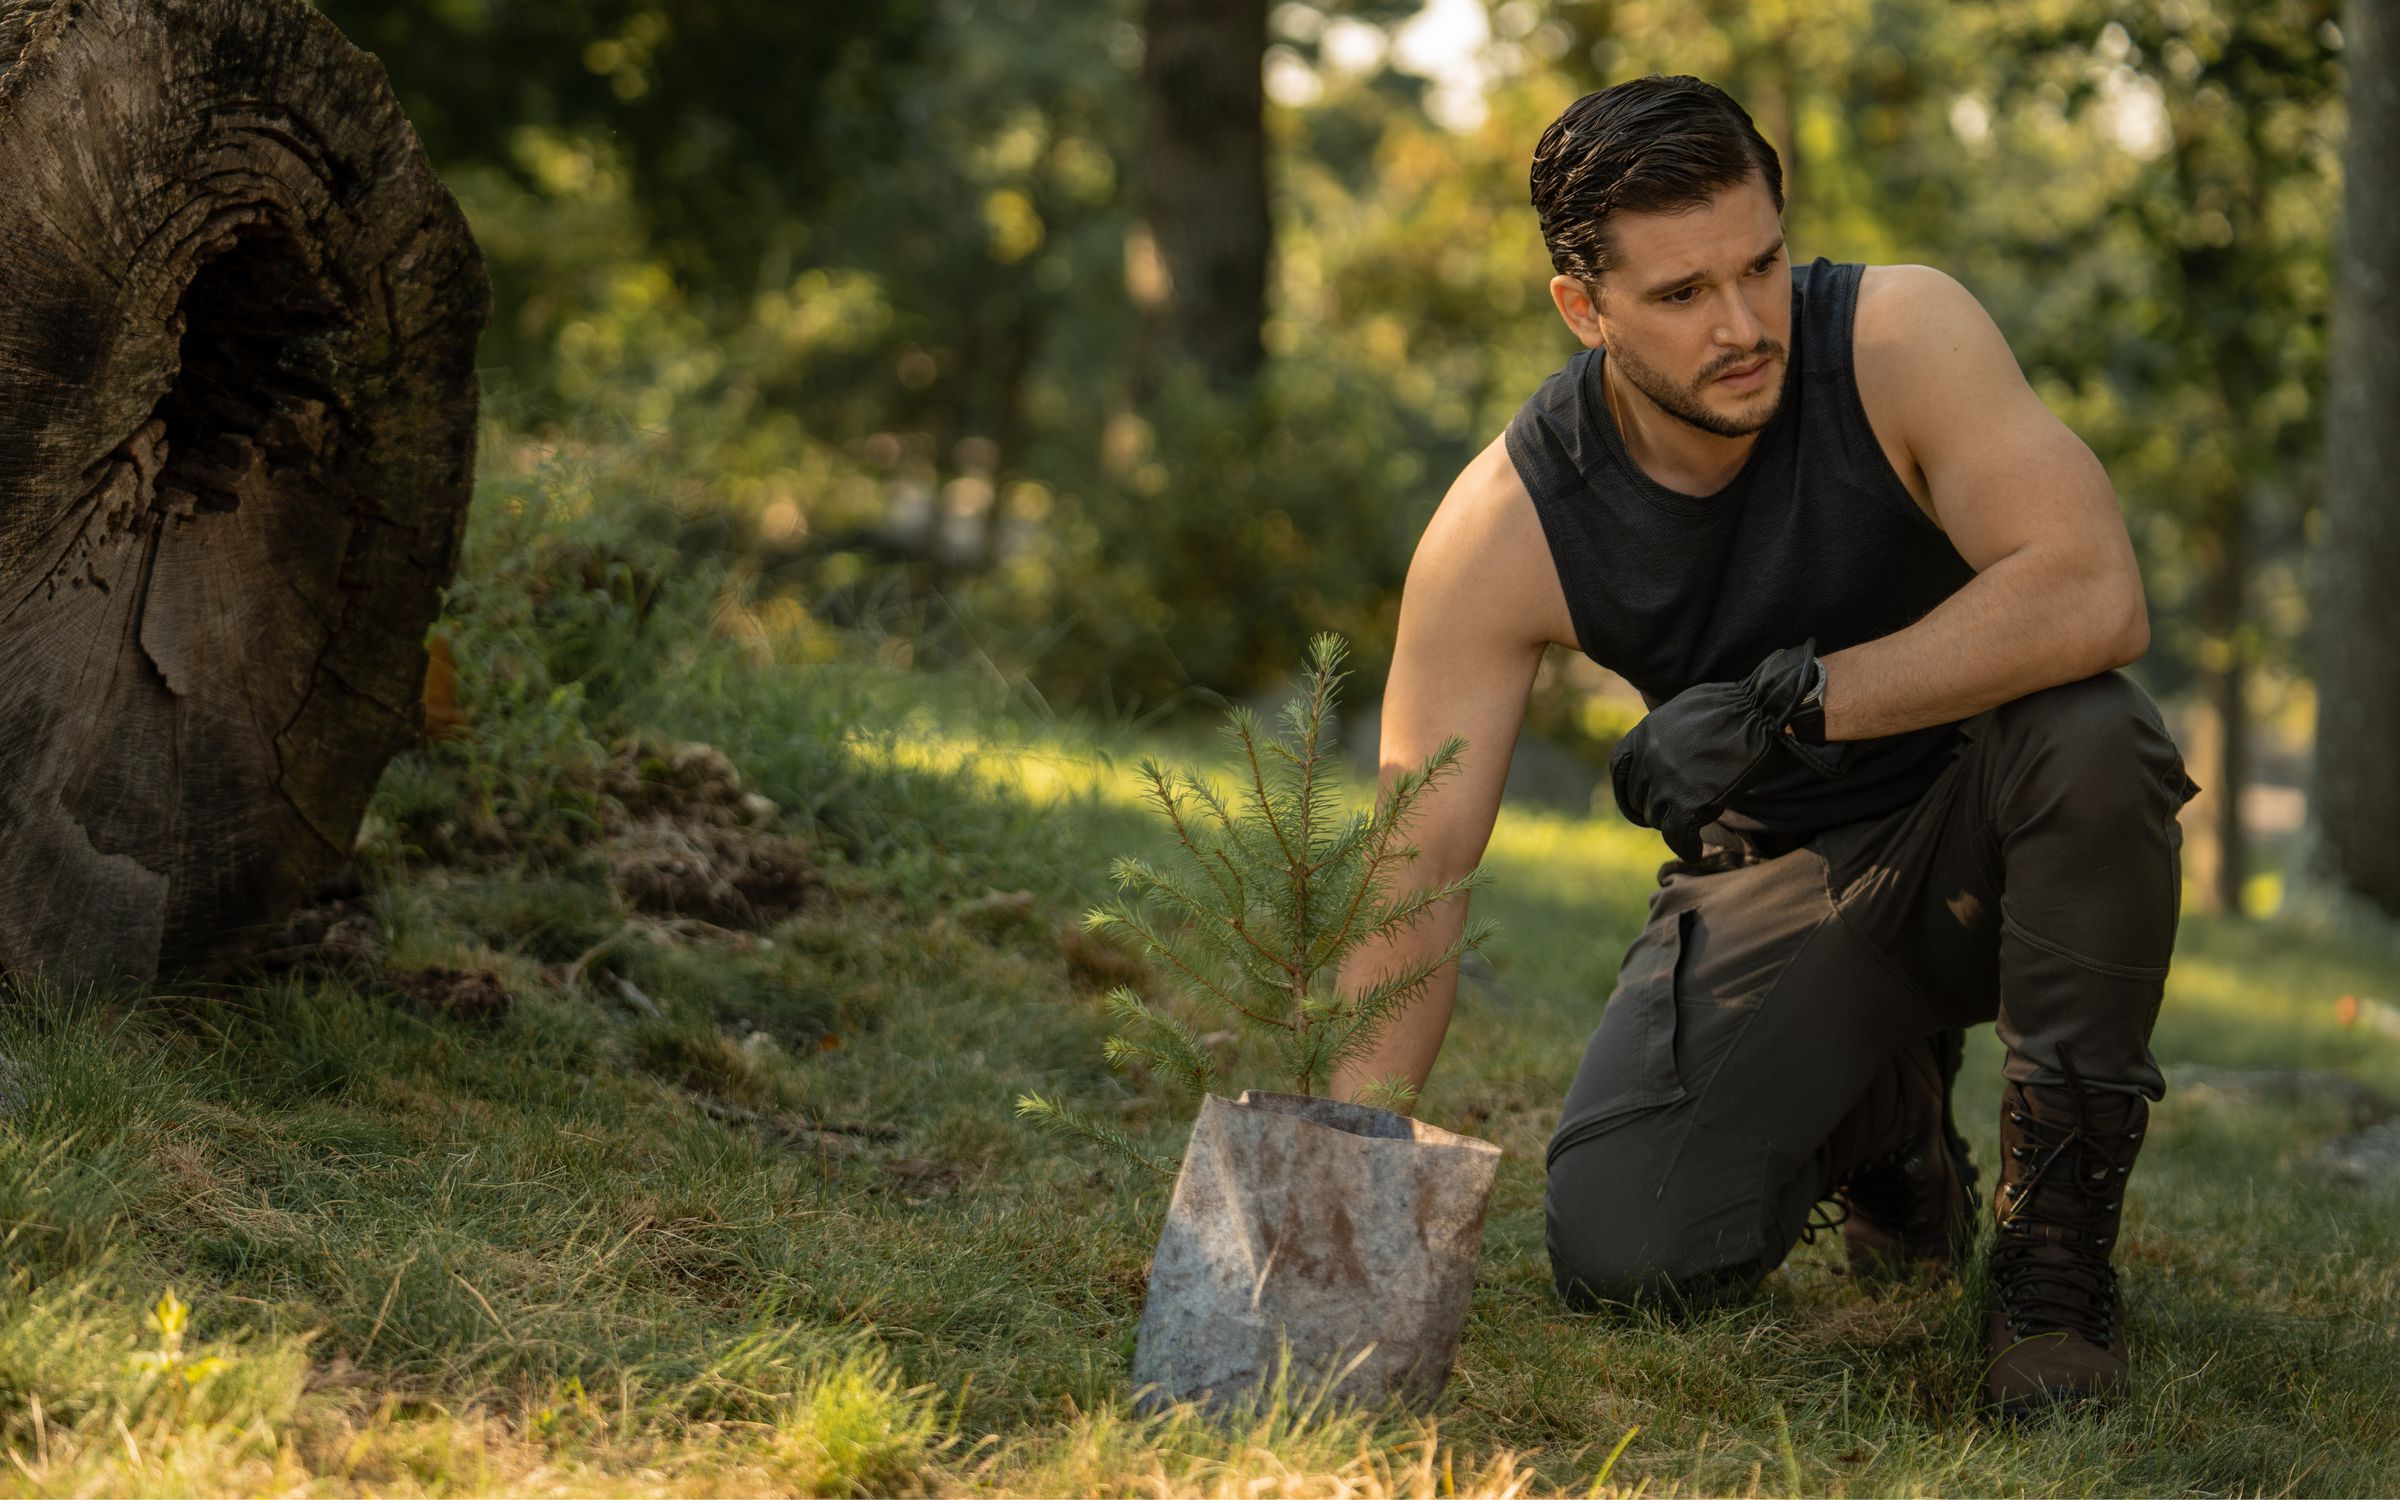 Kit Harington starring in Apple TV’s Extrapolations series. He is wearing black clothing and is in the woods beside a small sapling.